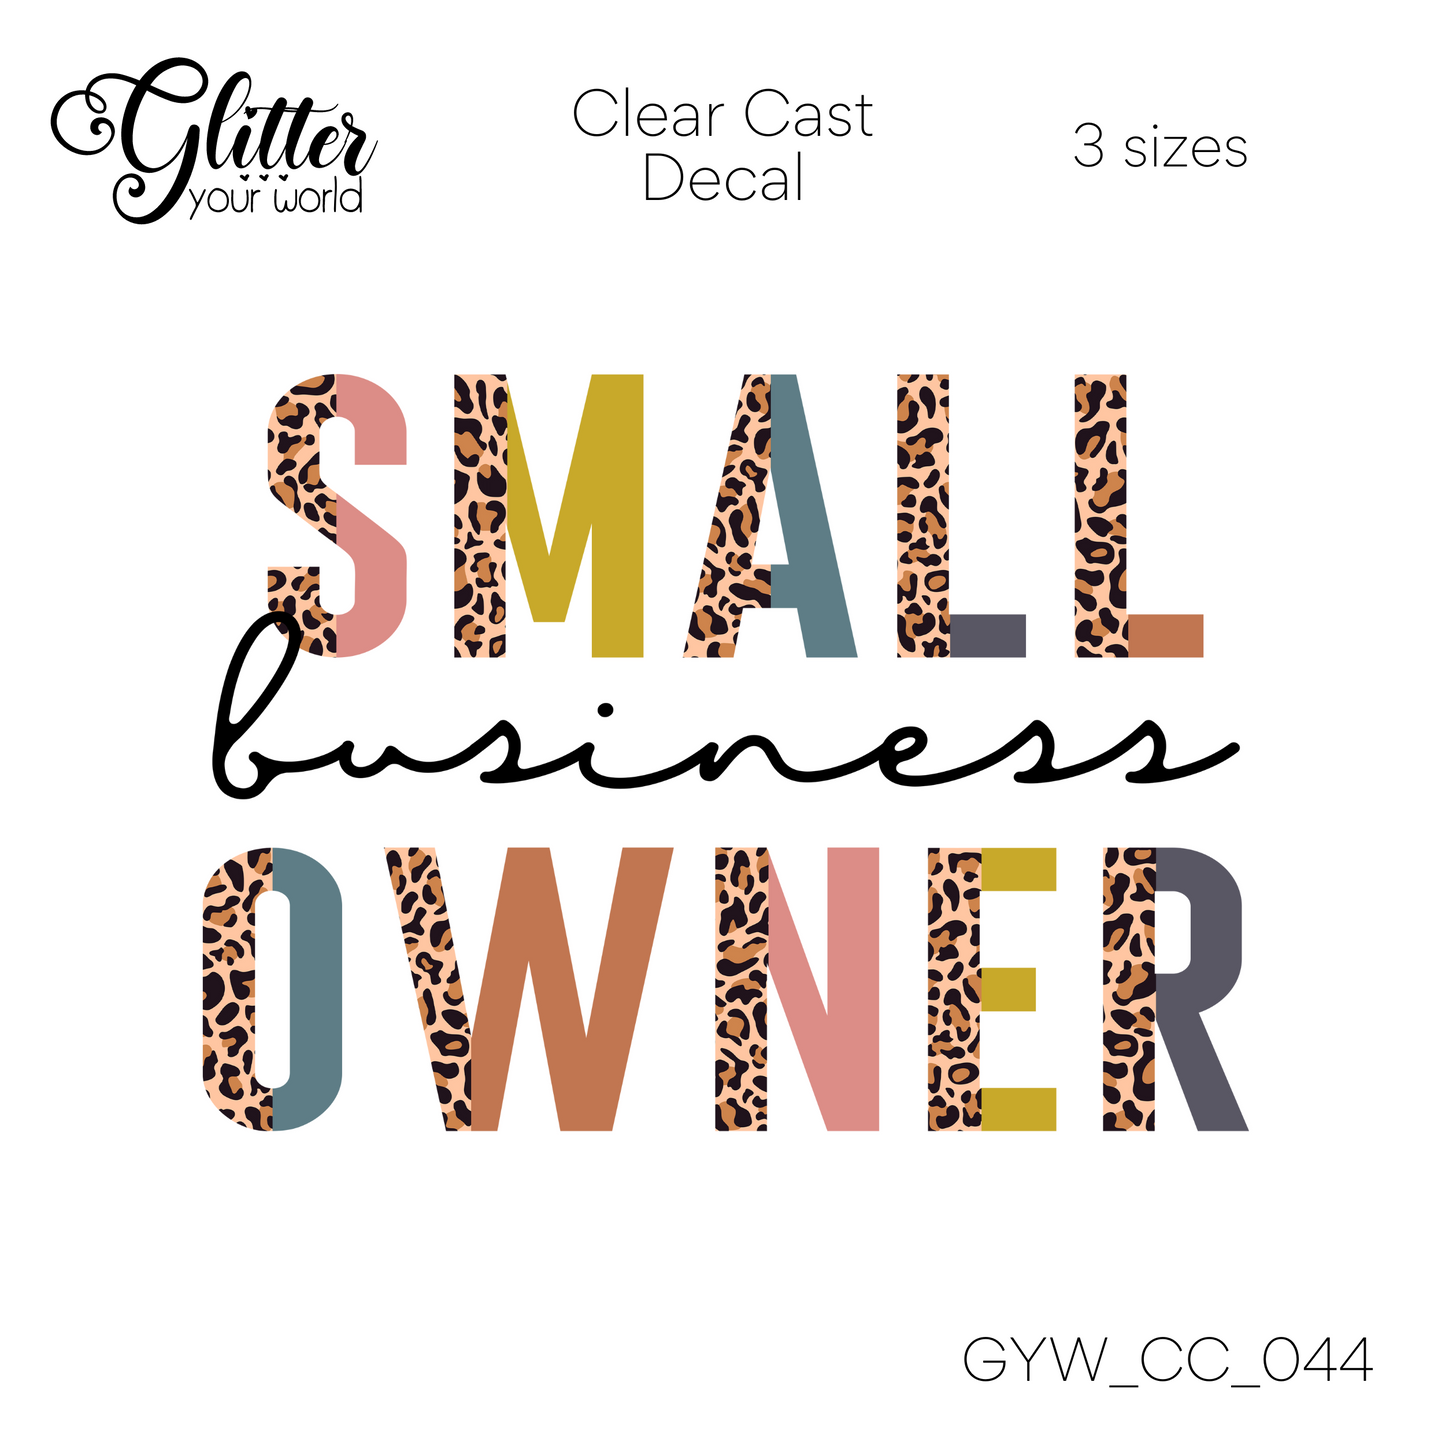 Small Business Owner CC_044 Clear Cast Decal